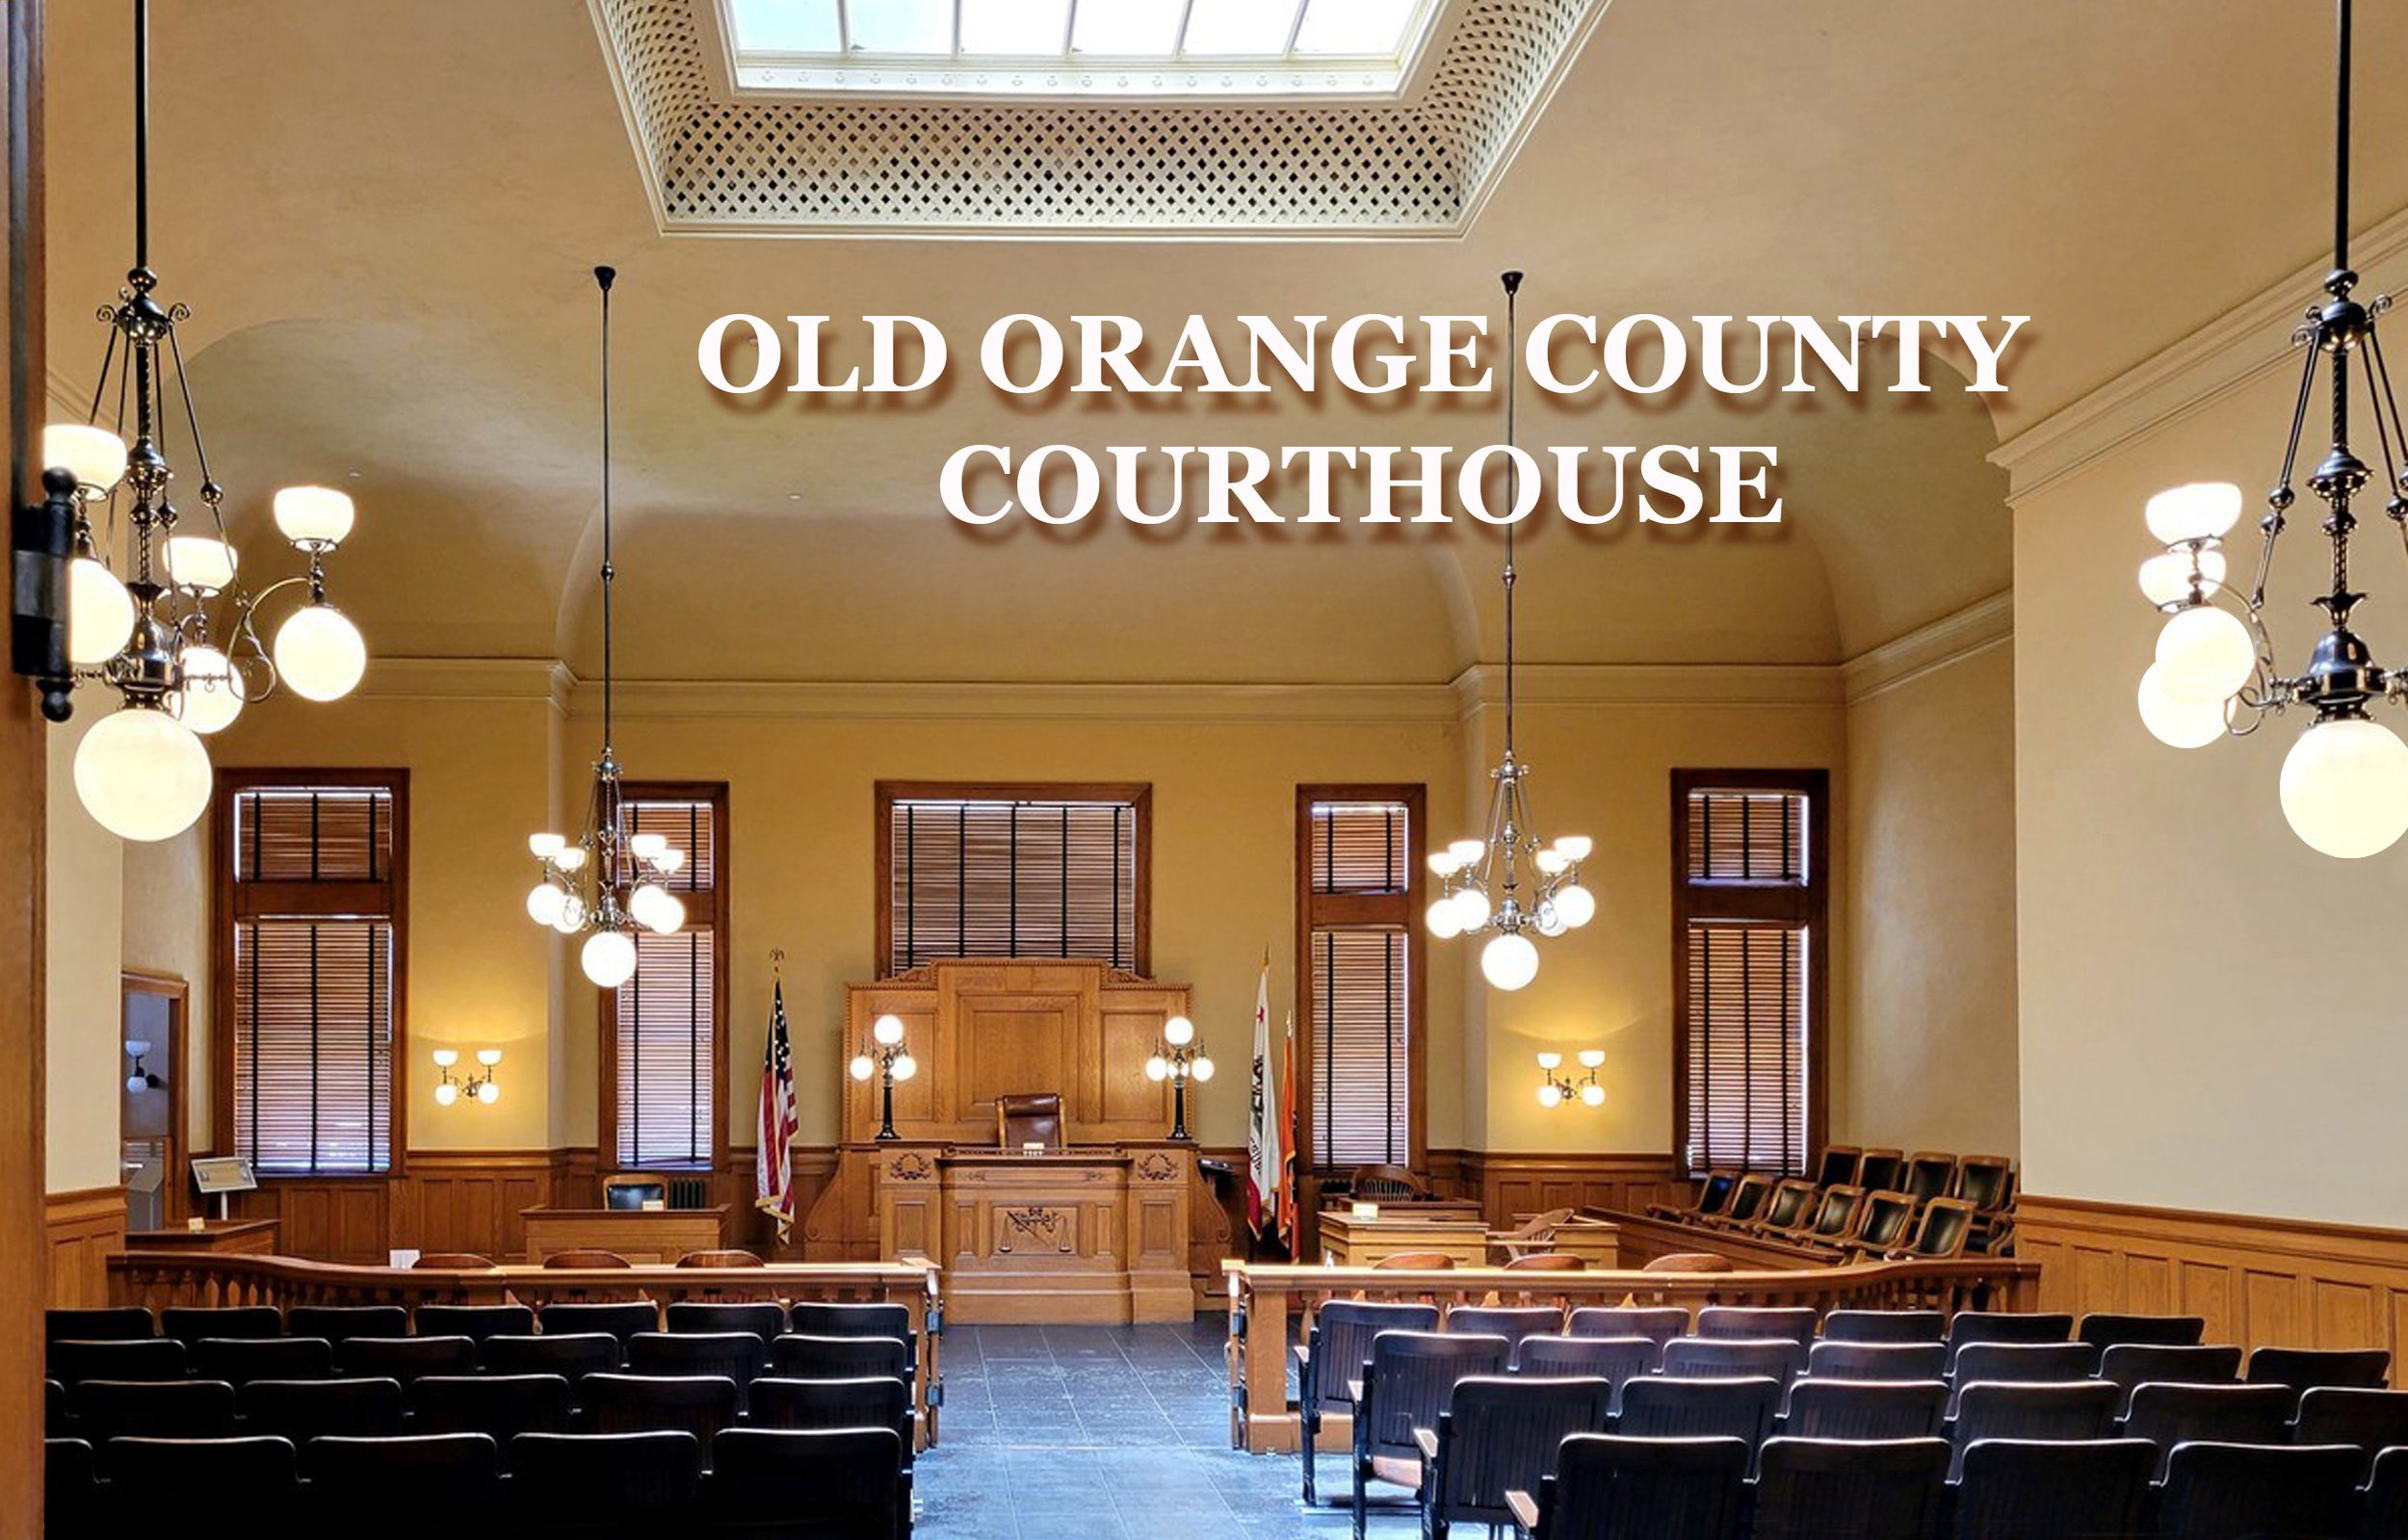 Old Orange County Courthouse - replicate